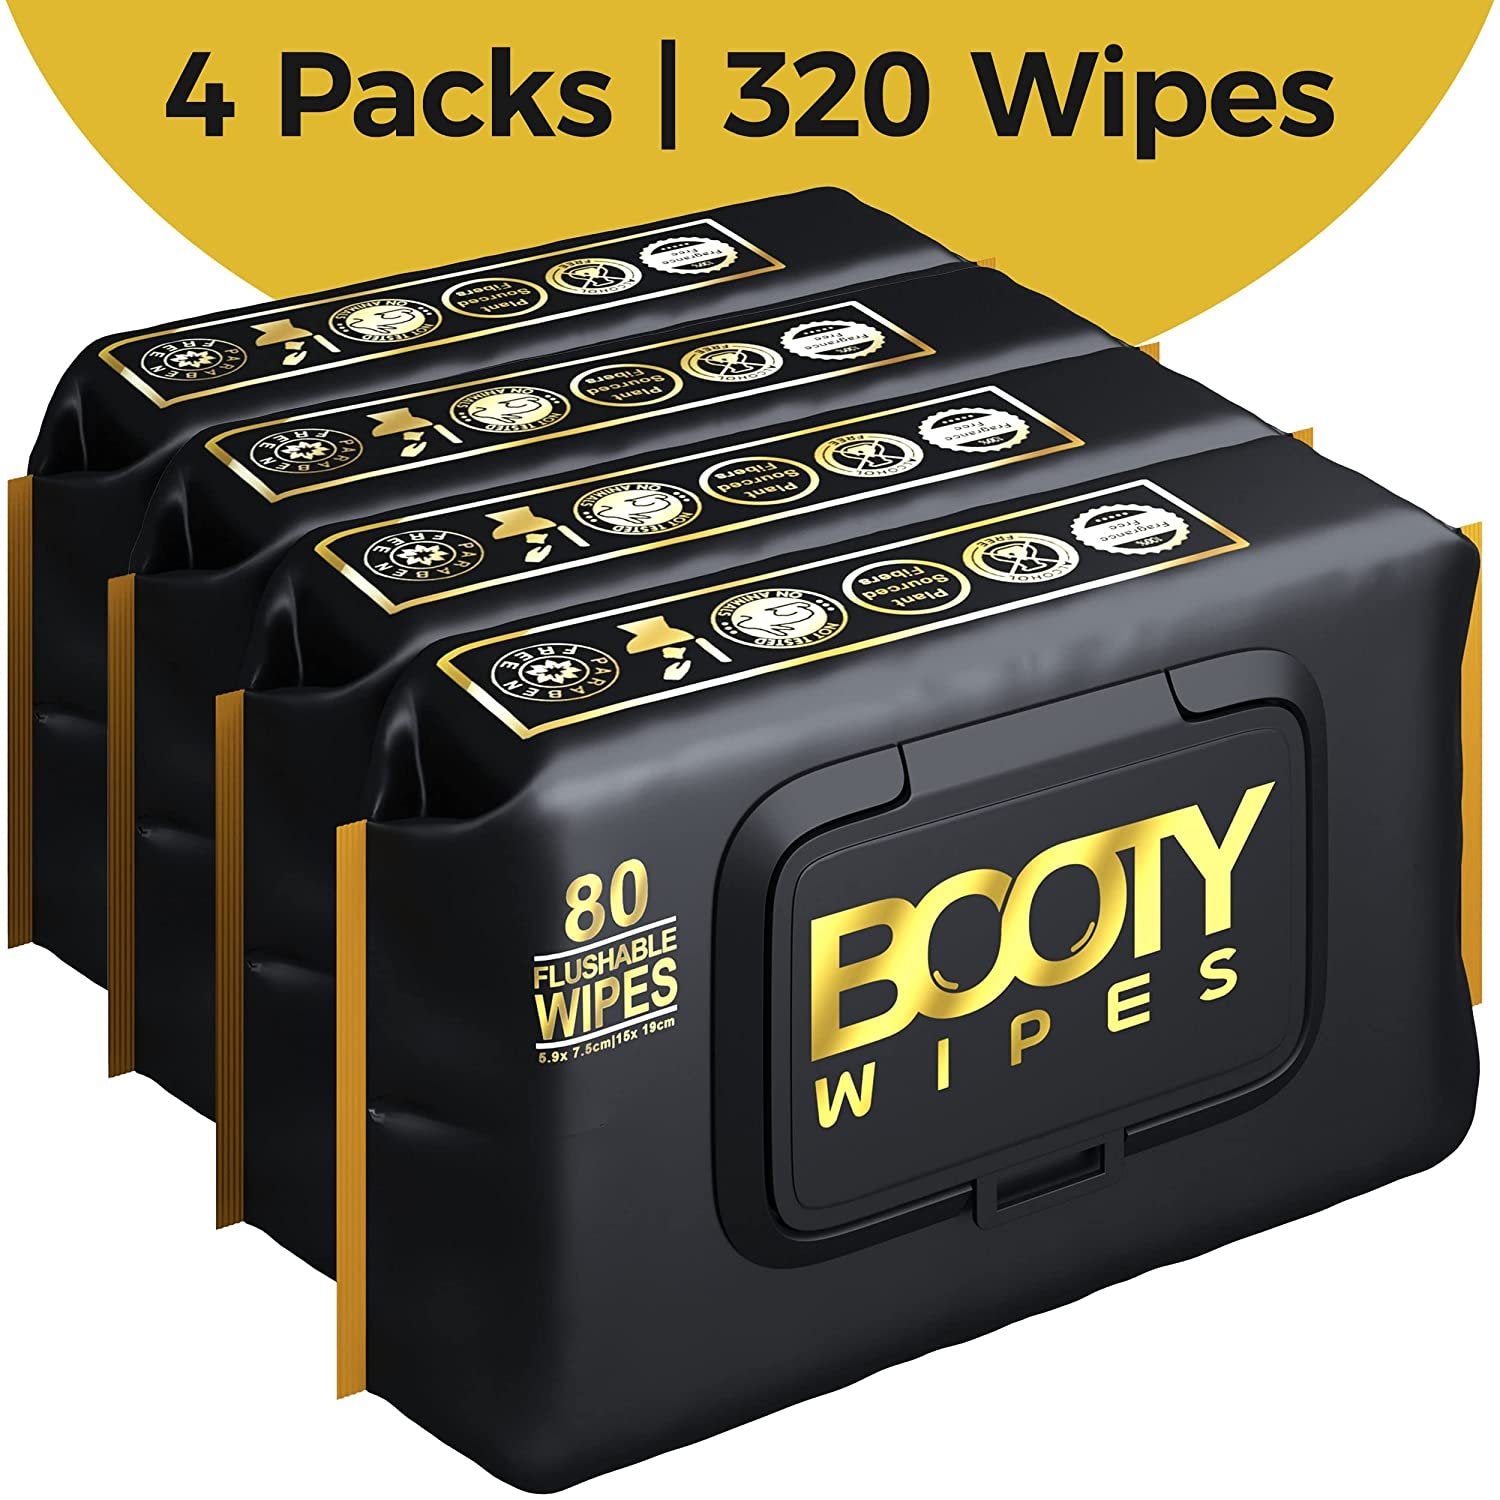 BOOTY WIPES for Men - 320 Flushable Wipes, pH Balanced, Infused with Vitamin-E & Aloe - White, Pack of 4 (80 ct each)